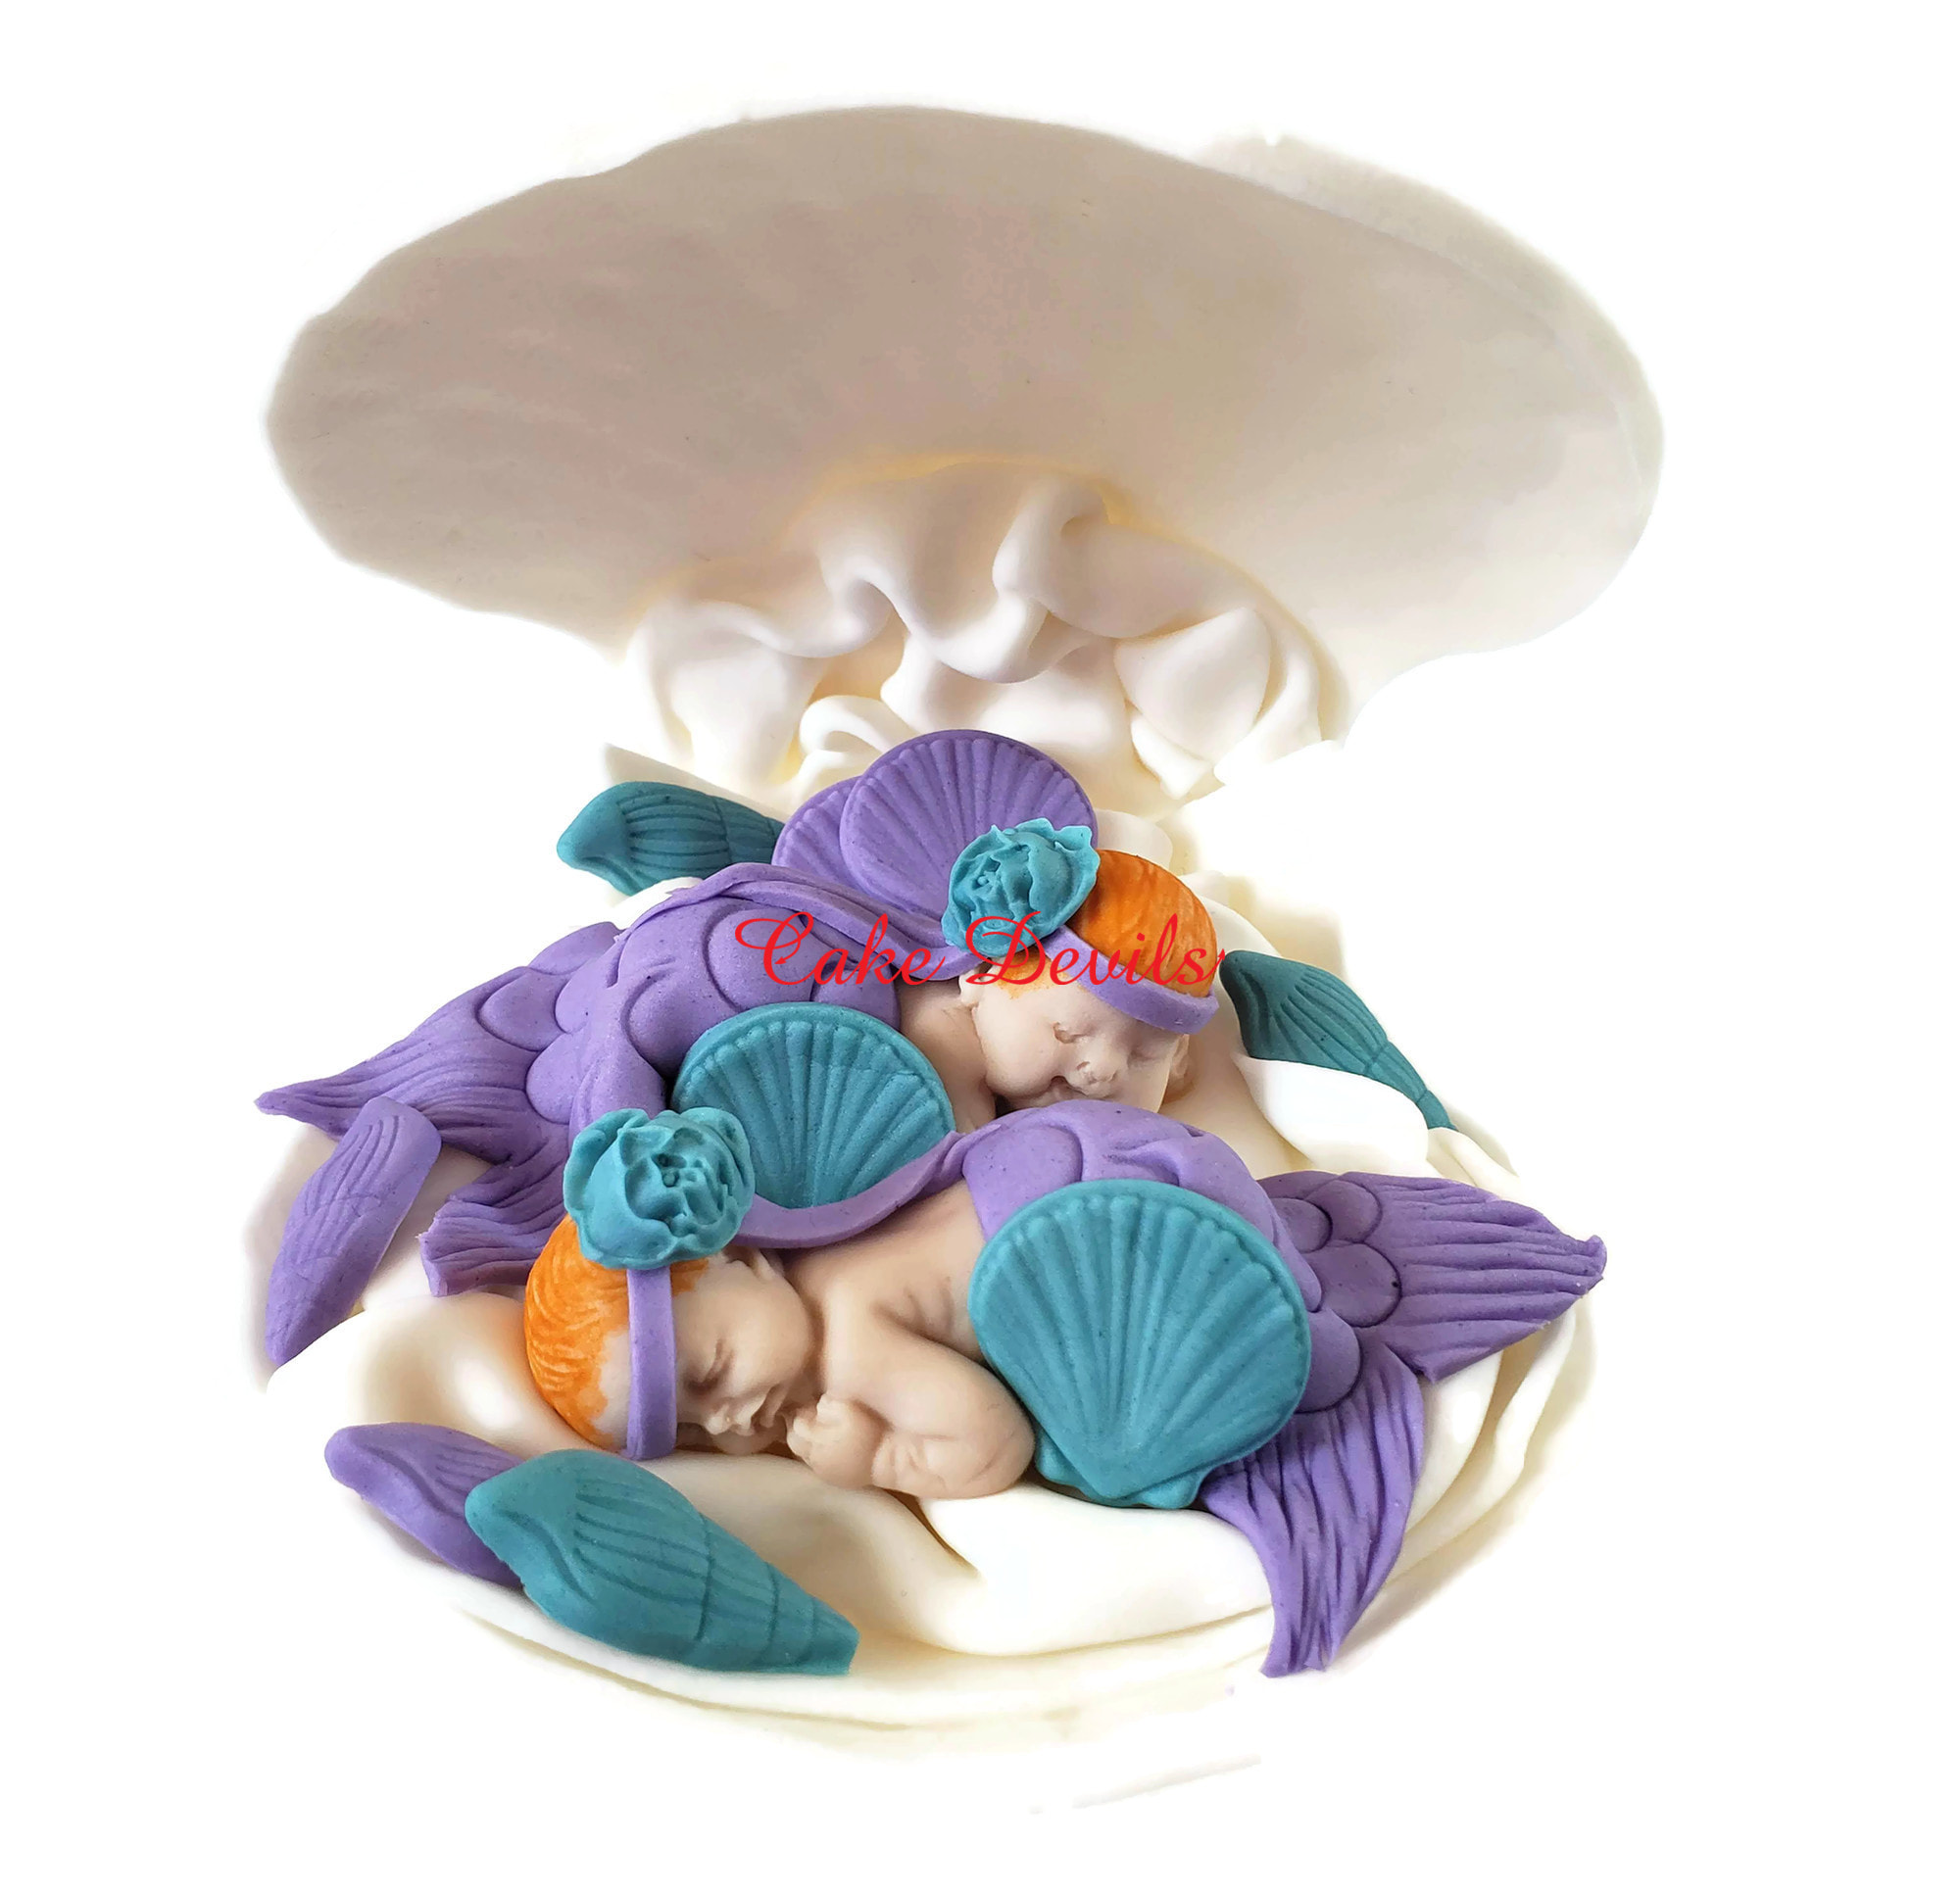 Twins Mermaid Baby Shower, Twin Fondant Mermaids in a Clam shell